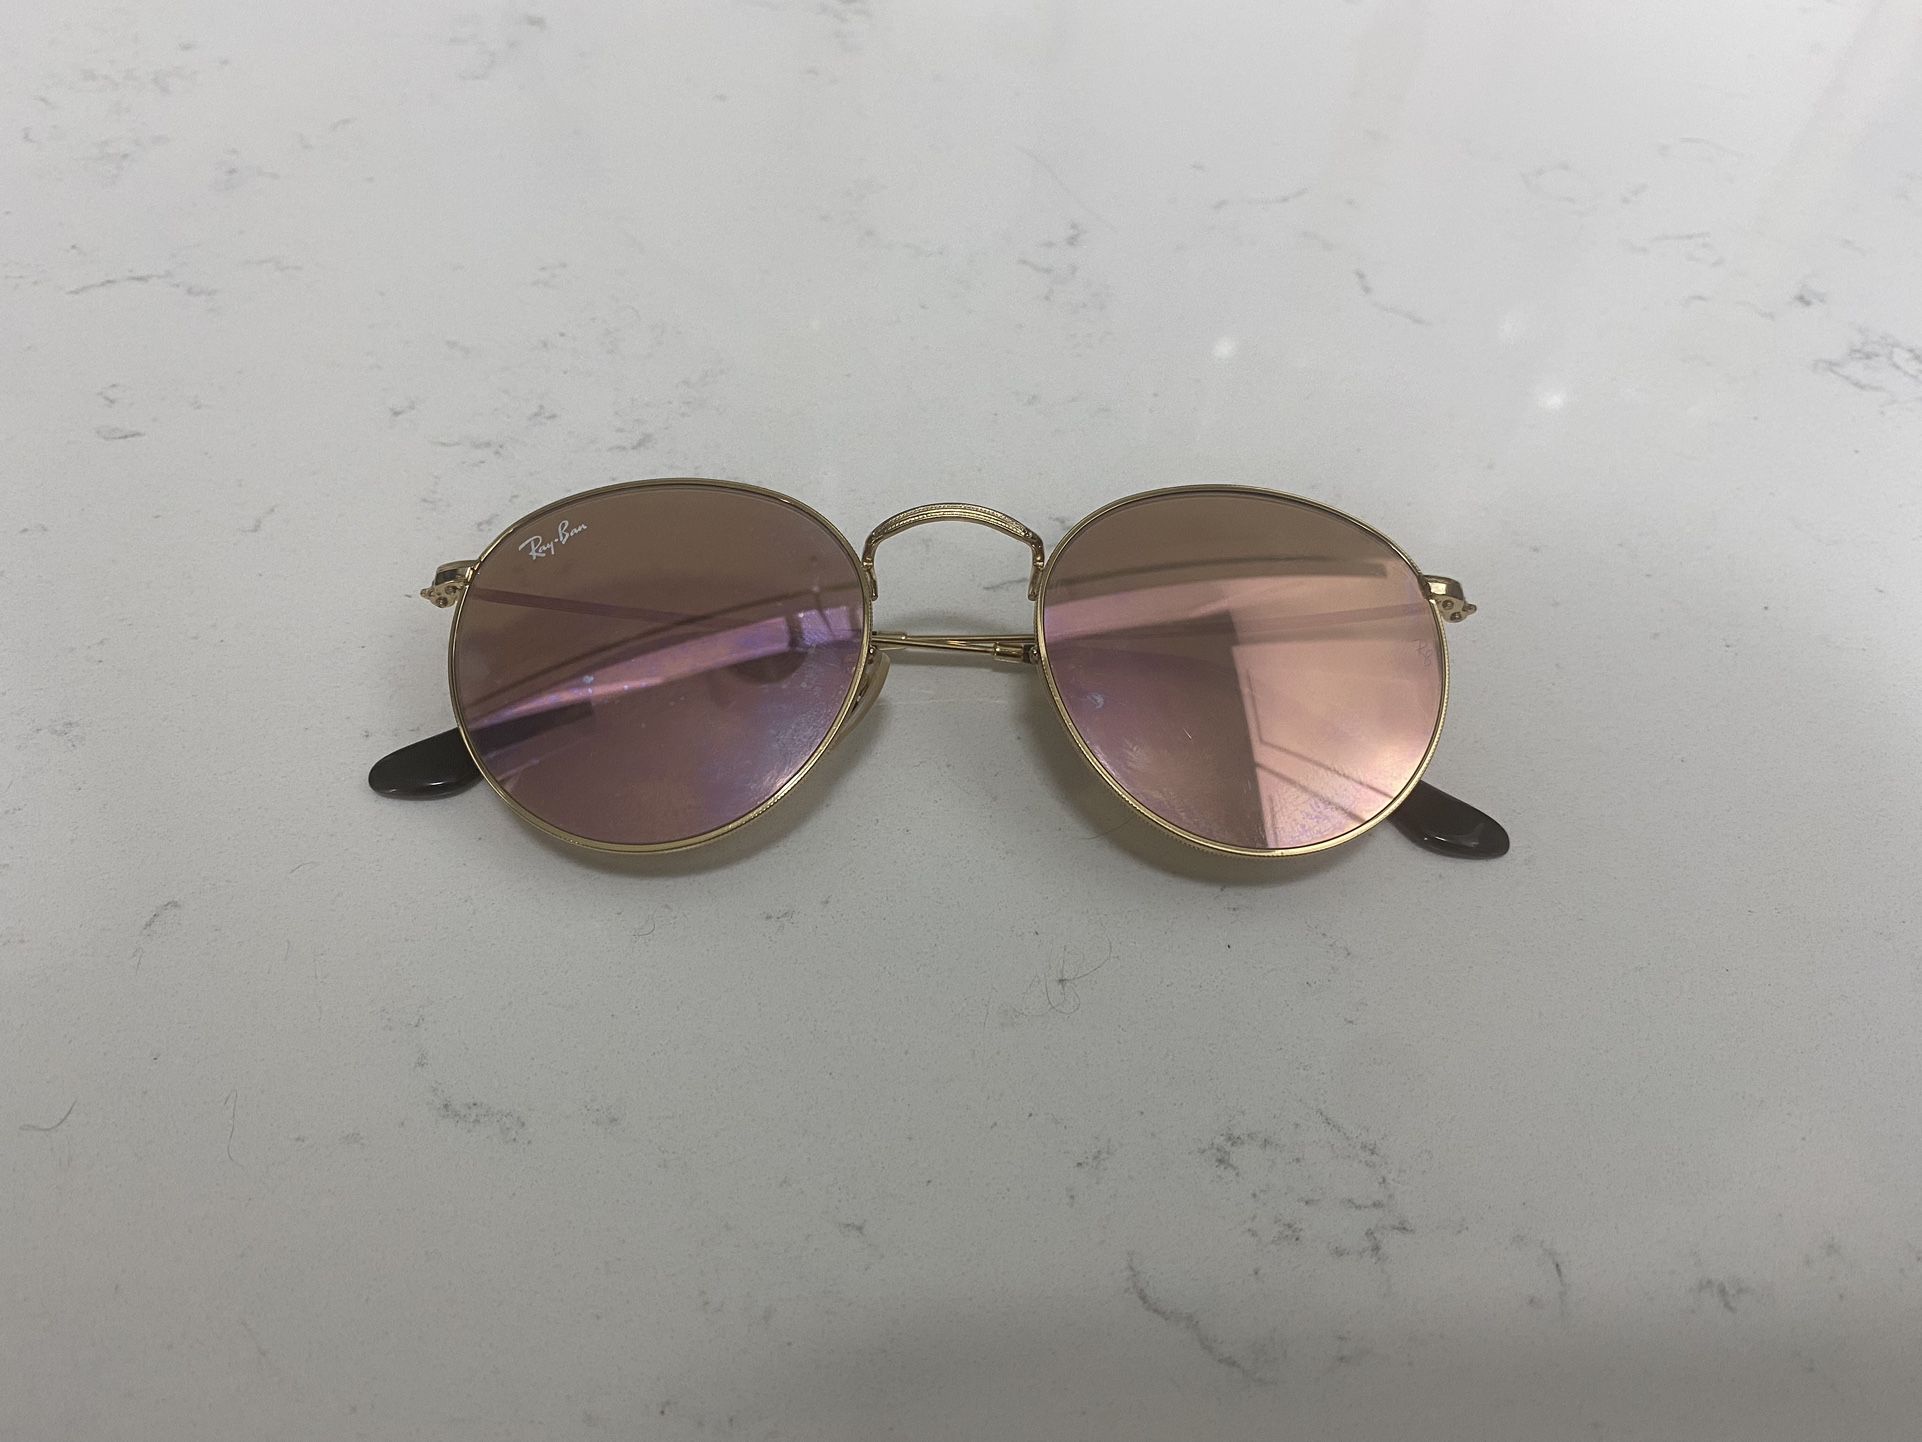 Ray Ban RB3447 Gold Frame Sunglasses